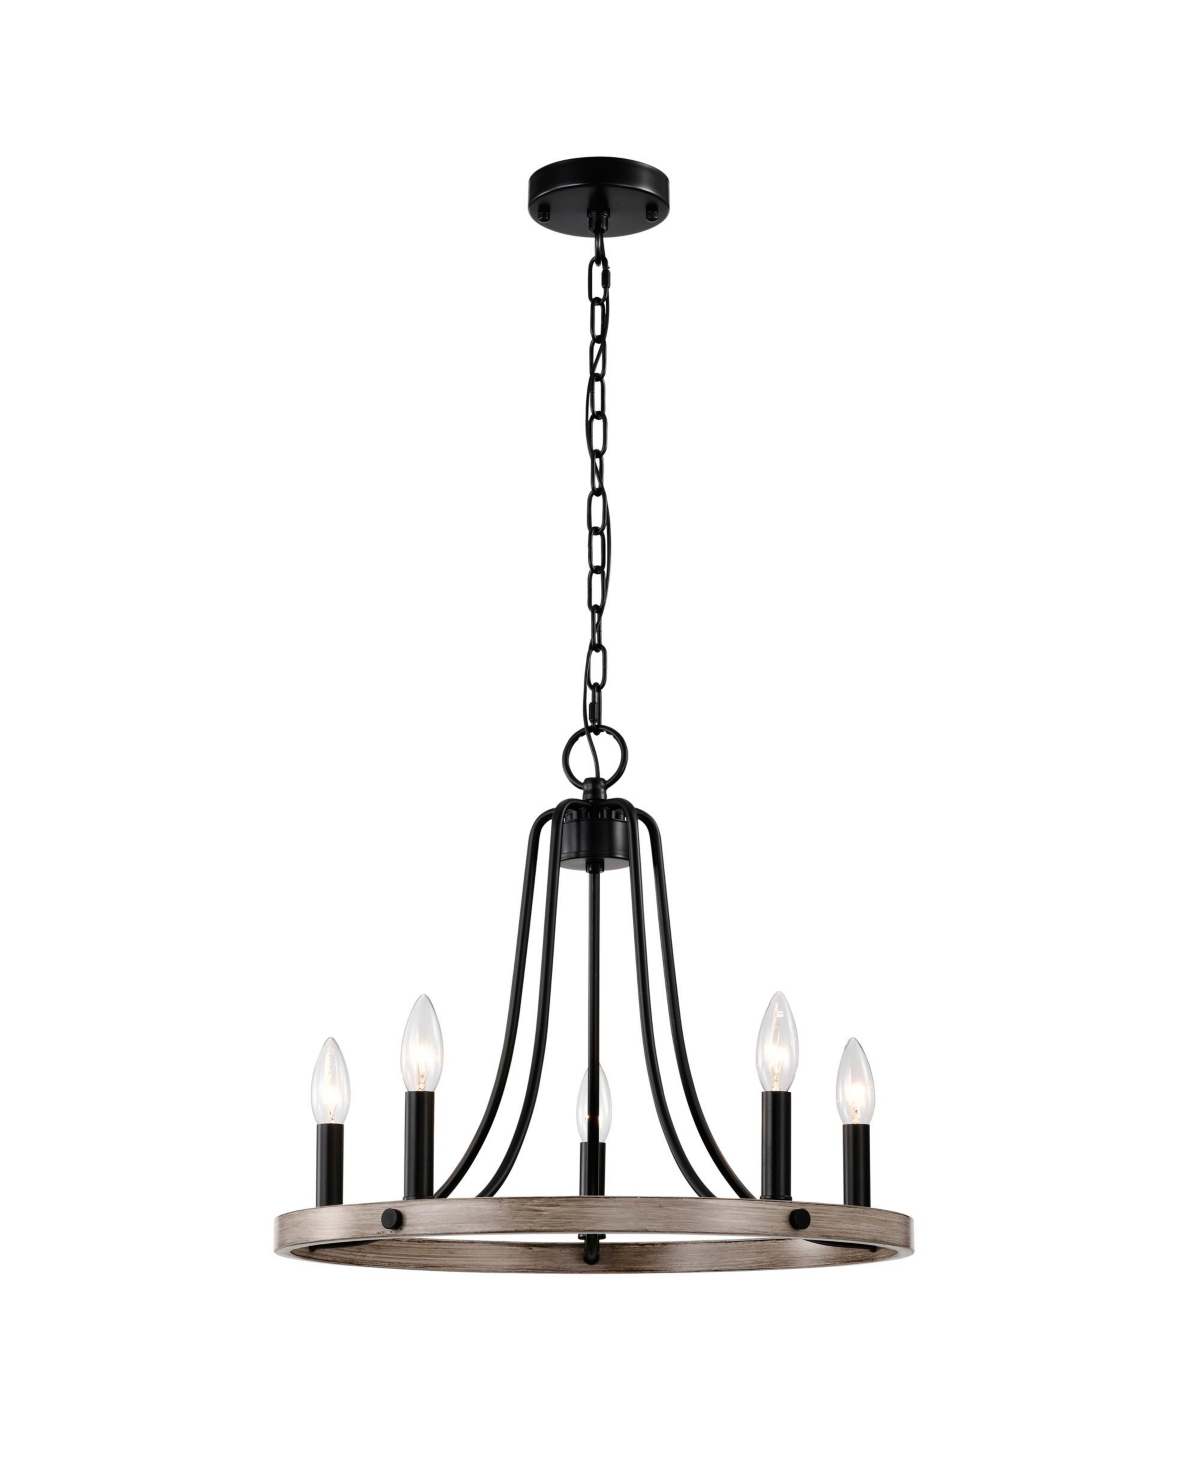 Home Accessories Ultan 20" 5-light Indoor Finish Chandelier With Light Kit In Matte Black And Faux Wood Grain